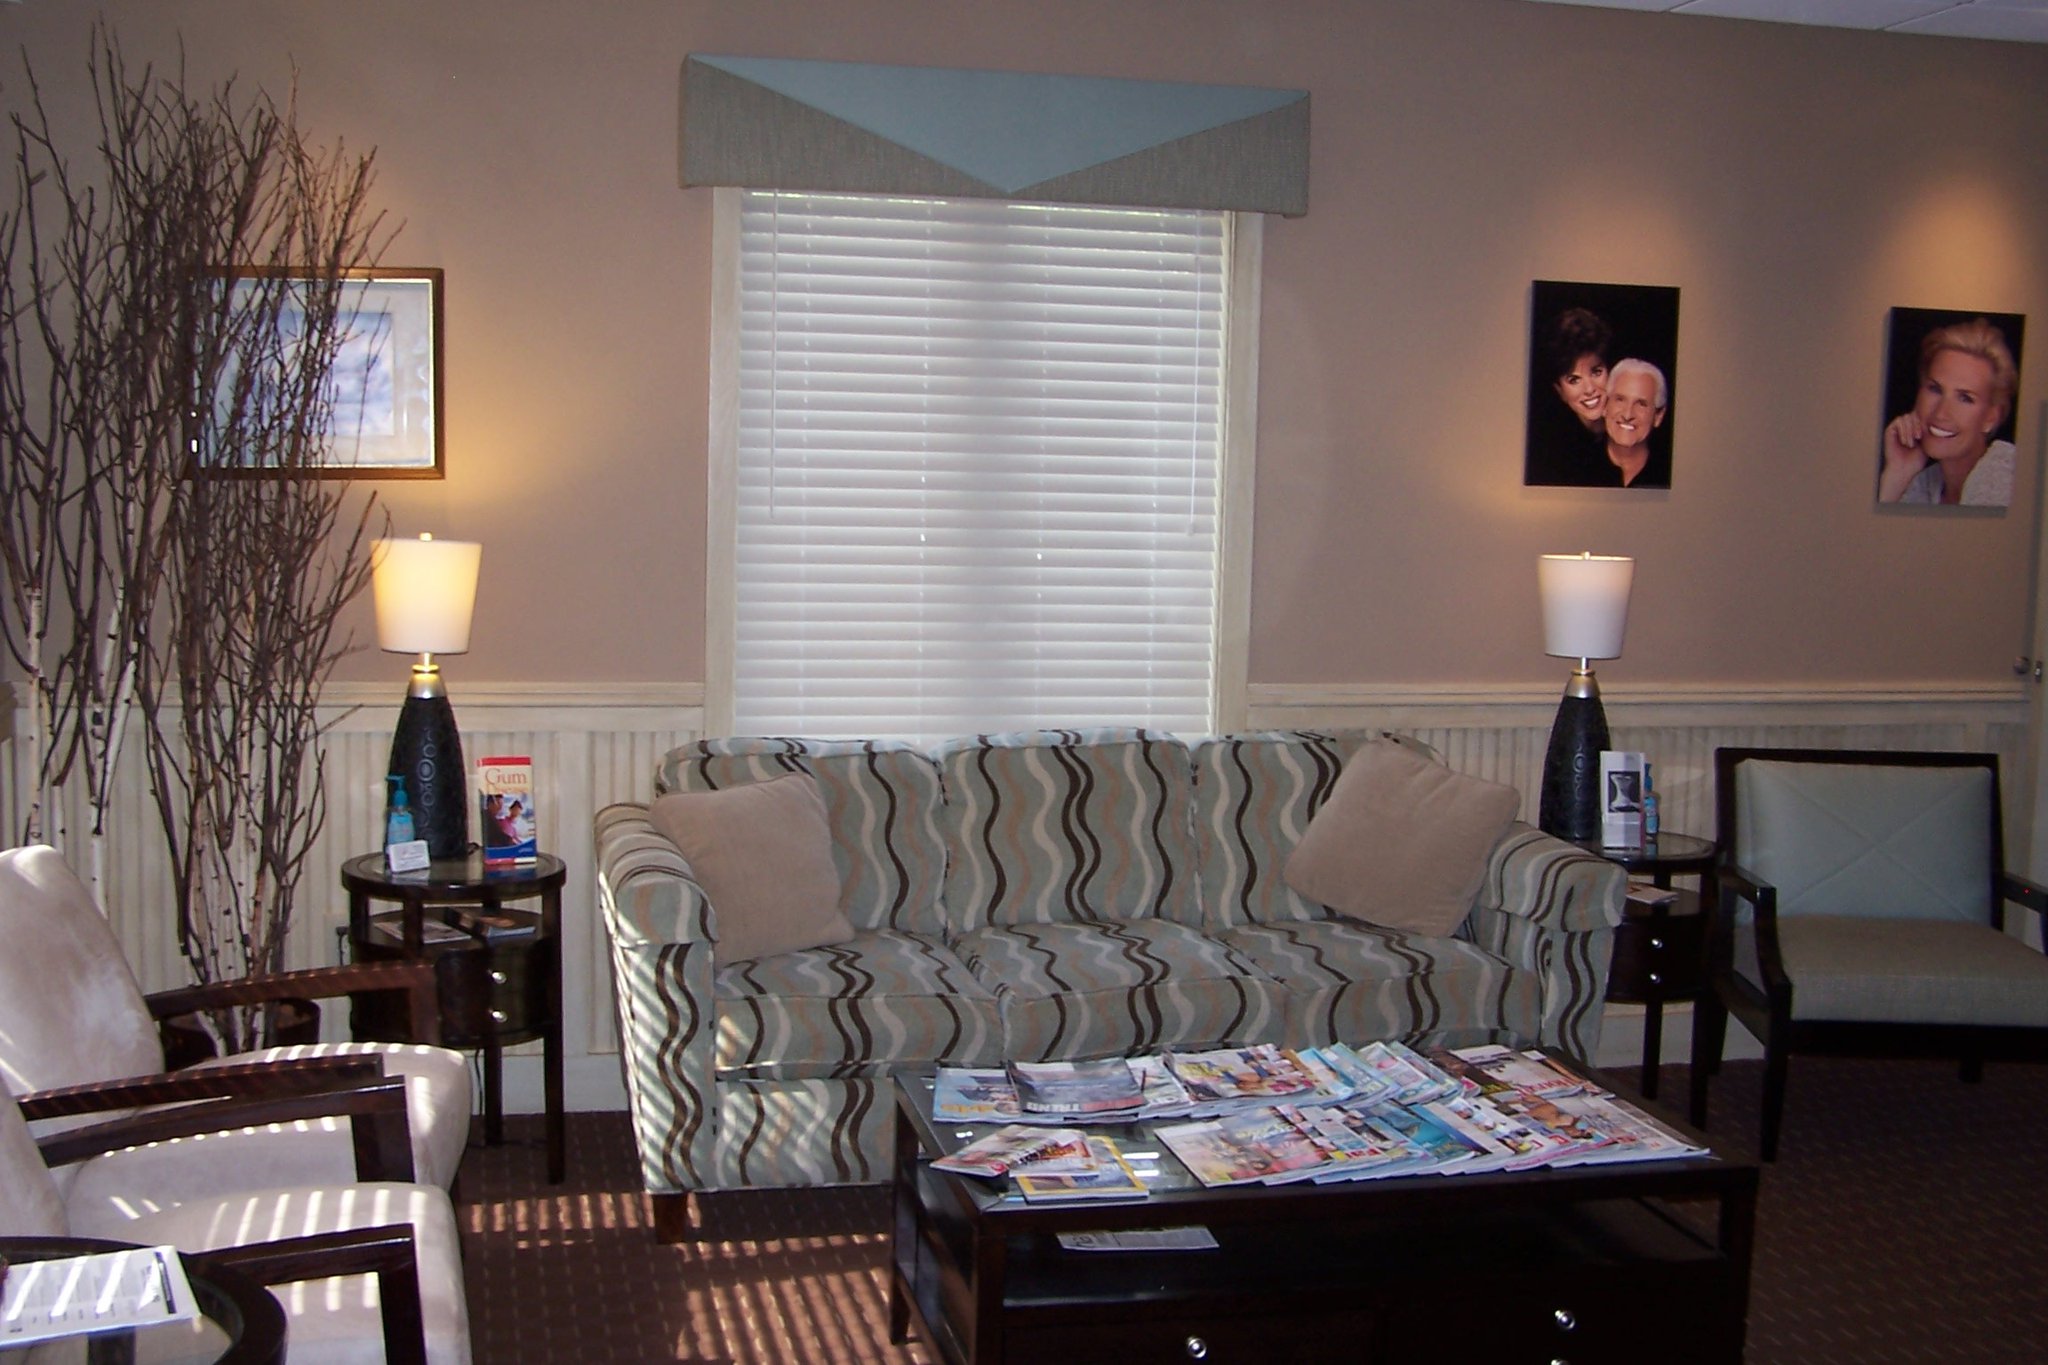 The Oral Health Center Redesigns Their Dentist Office in Westerville, OH